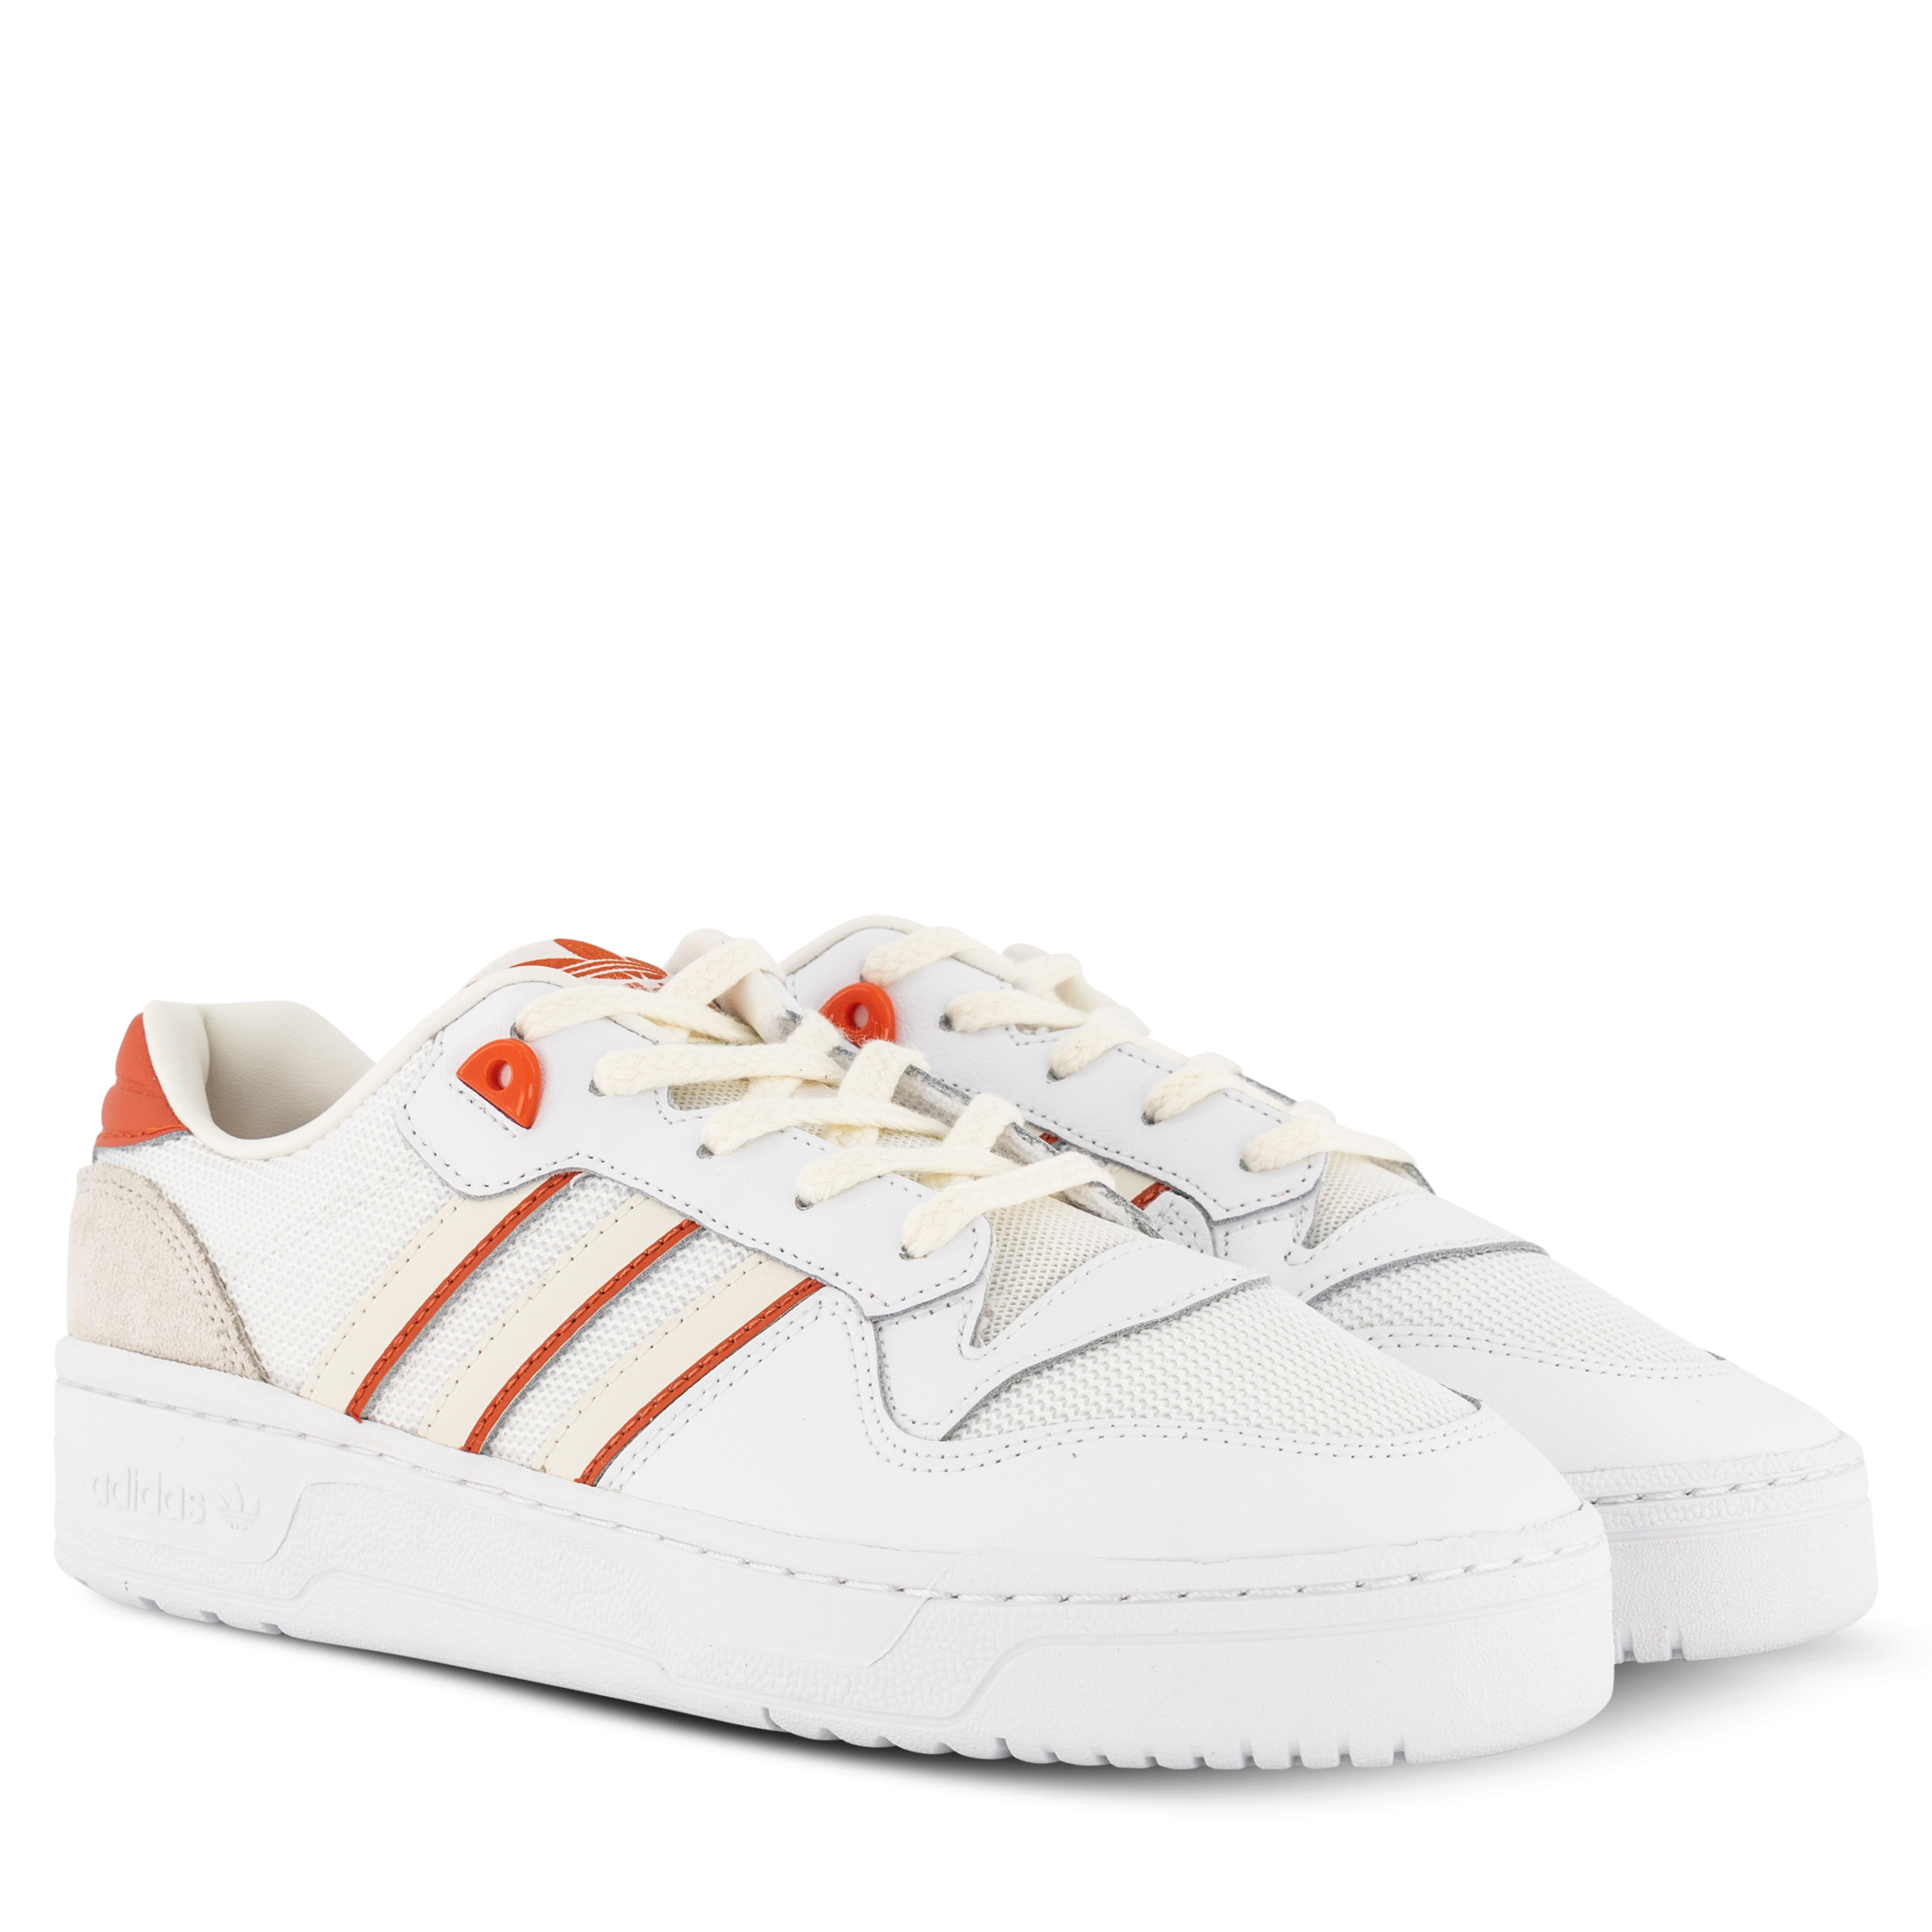 adidas Originals RIVALRY LOW Ftwr White/Off White/Preloved Red | Hype DC